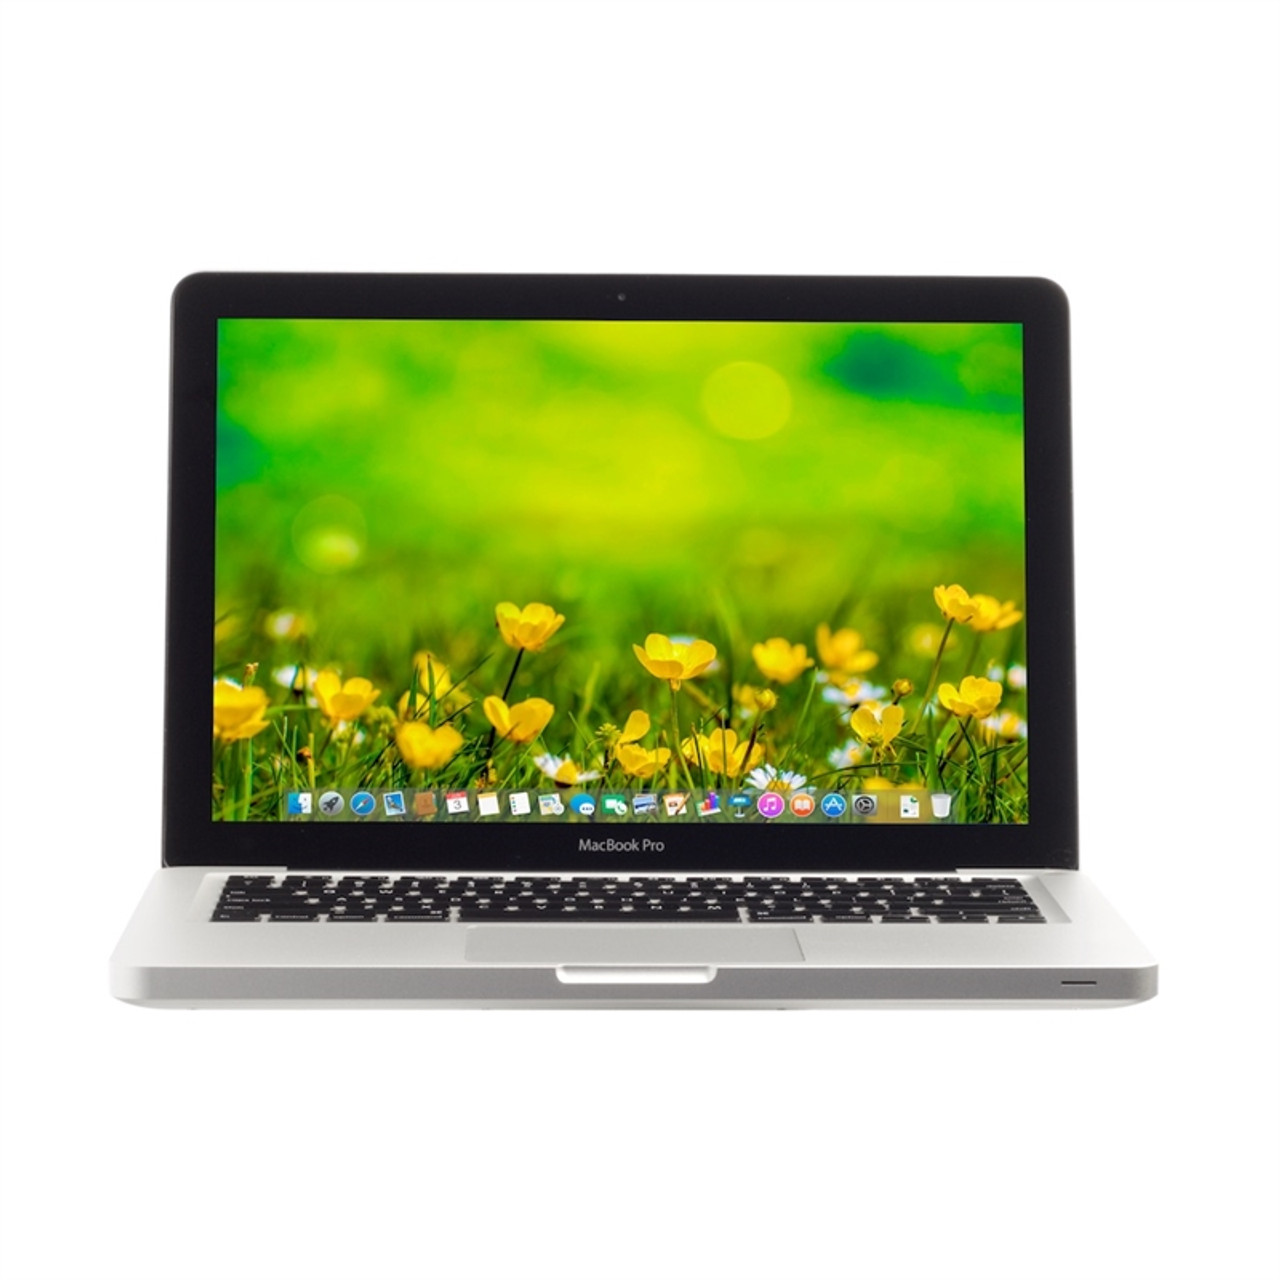 Apple MacBook Pro 13-inch (Glossy) 2.5GHz Core i5 (Mid 2012)